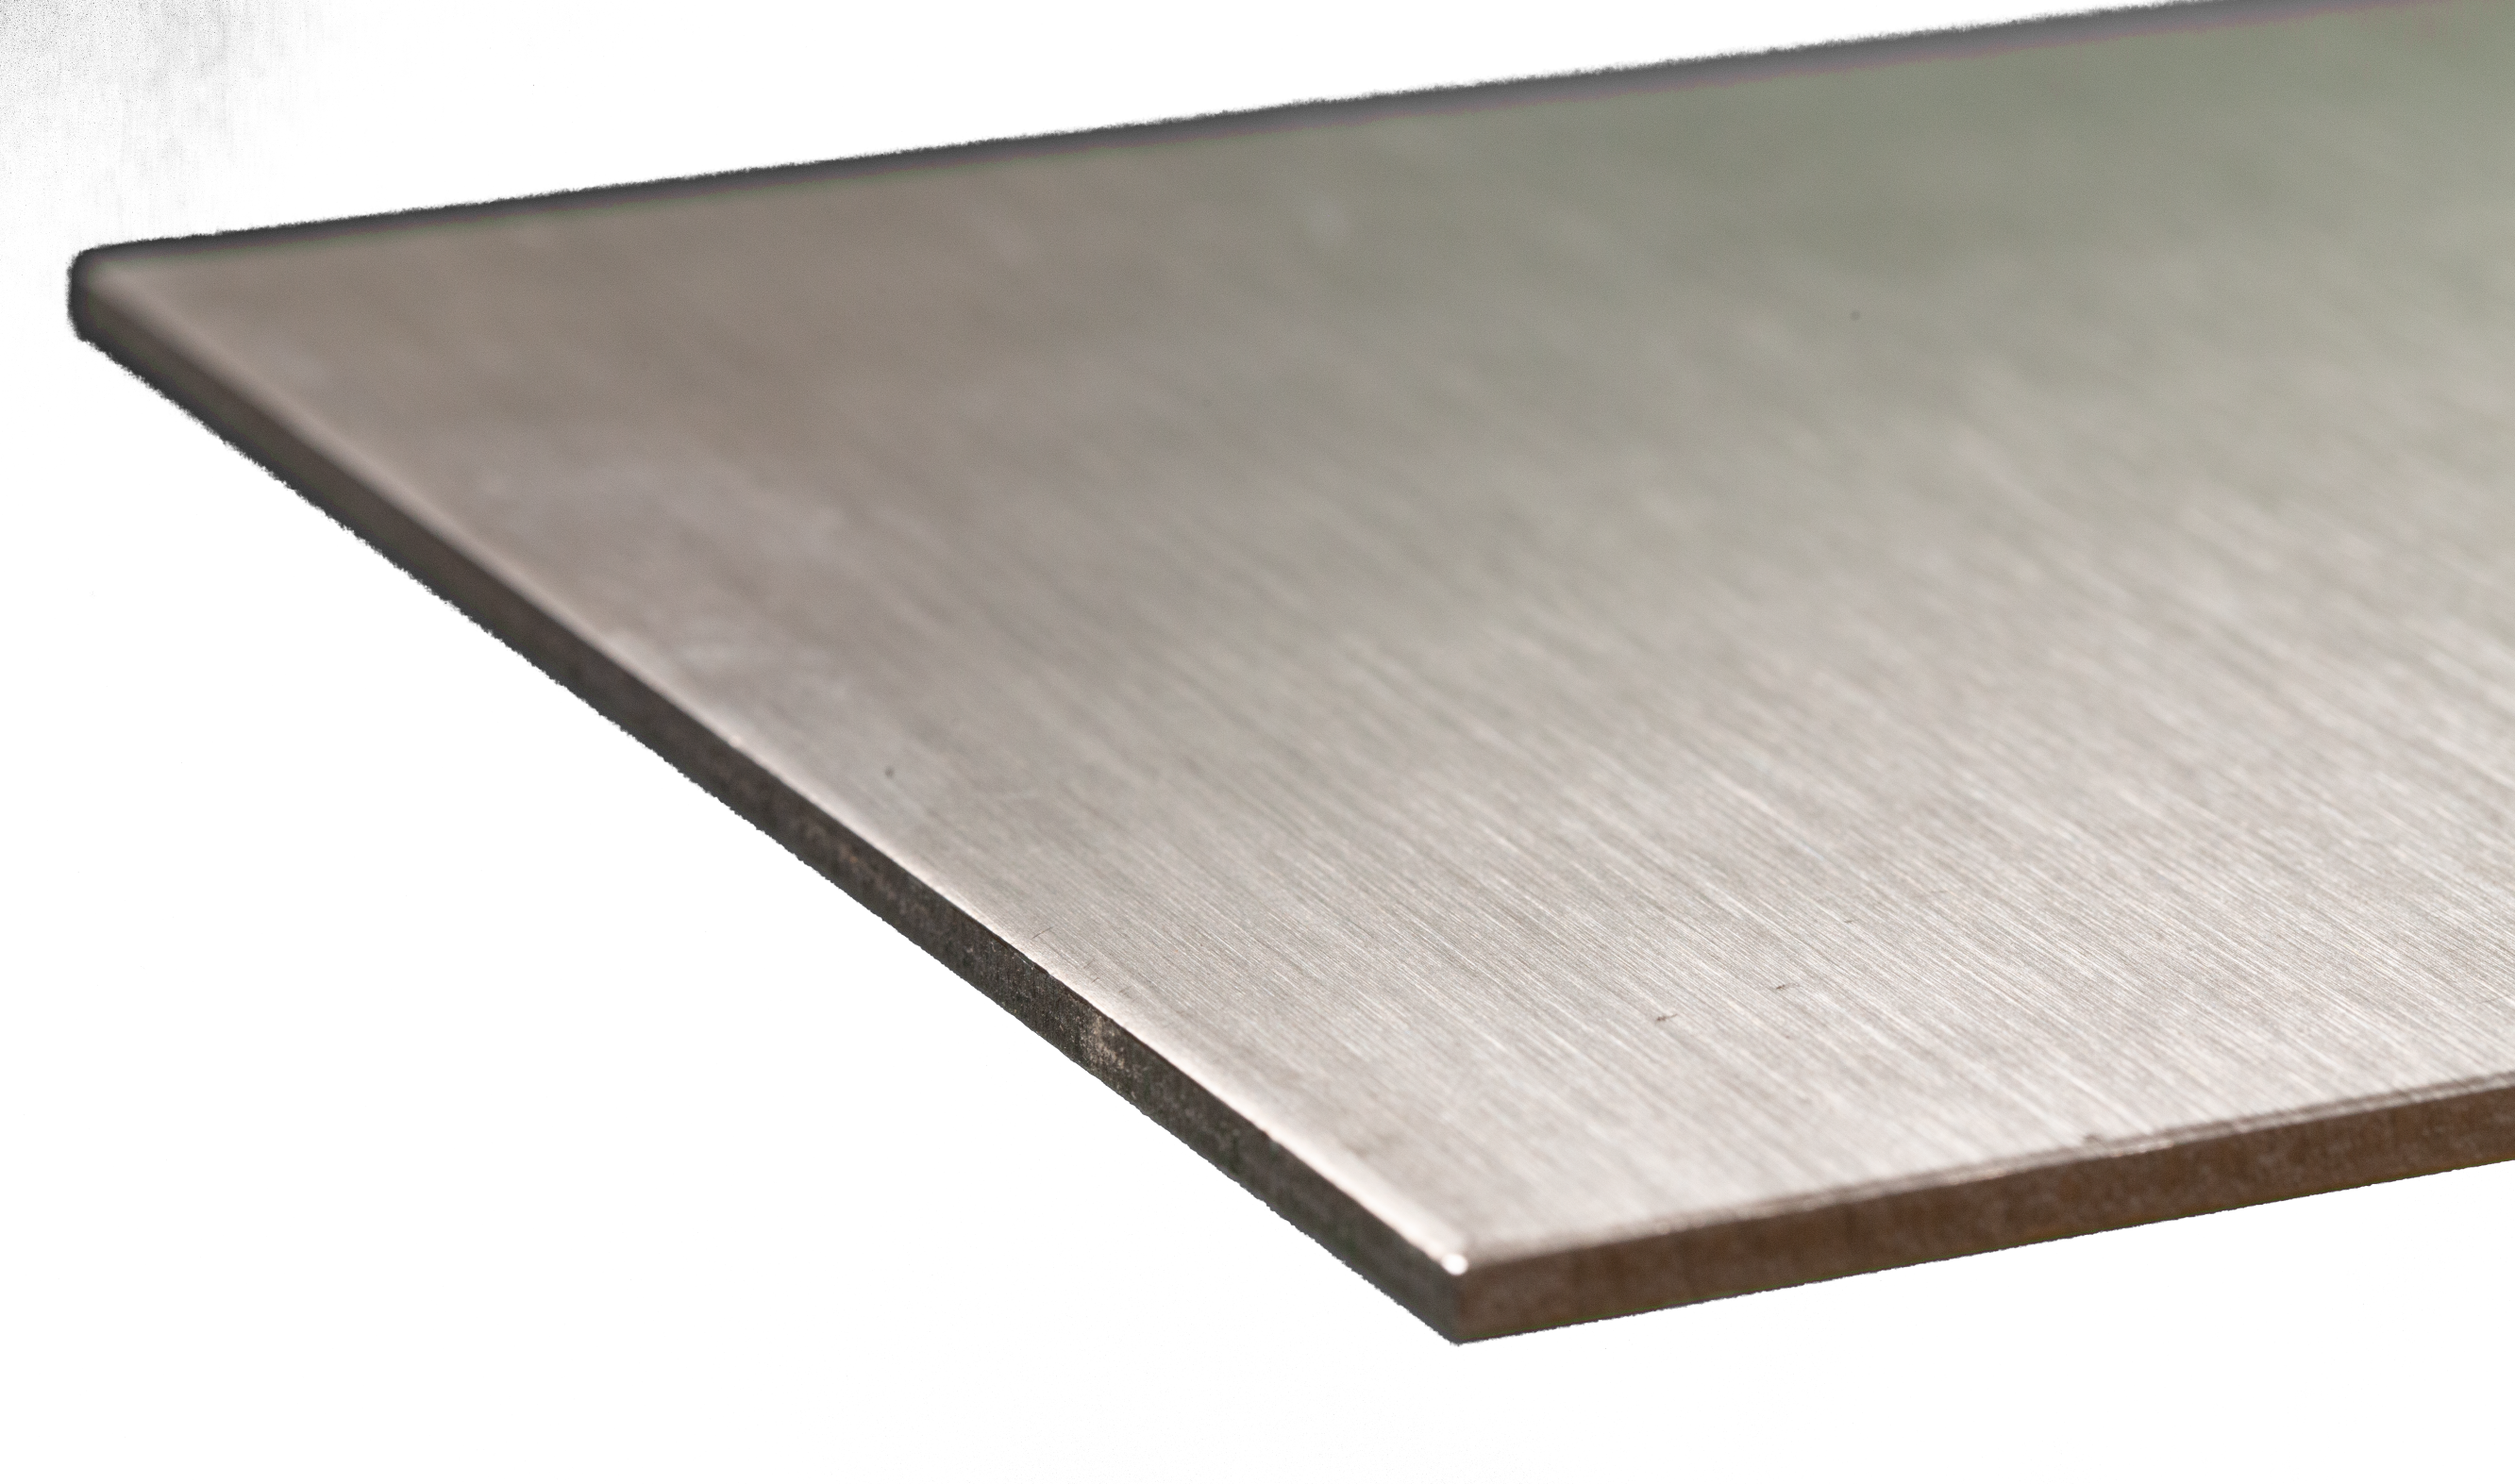 K&S Metals 276 Stainless Steel Sheet Metal 0.018" Thick x 4" Wide x 10" Long (1 Piece)